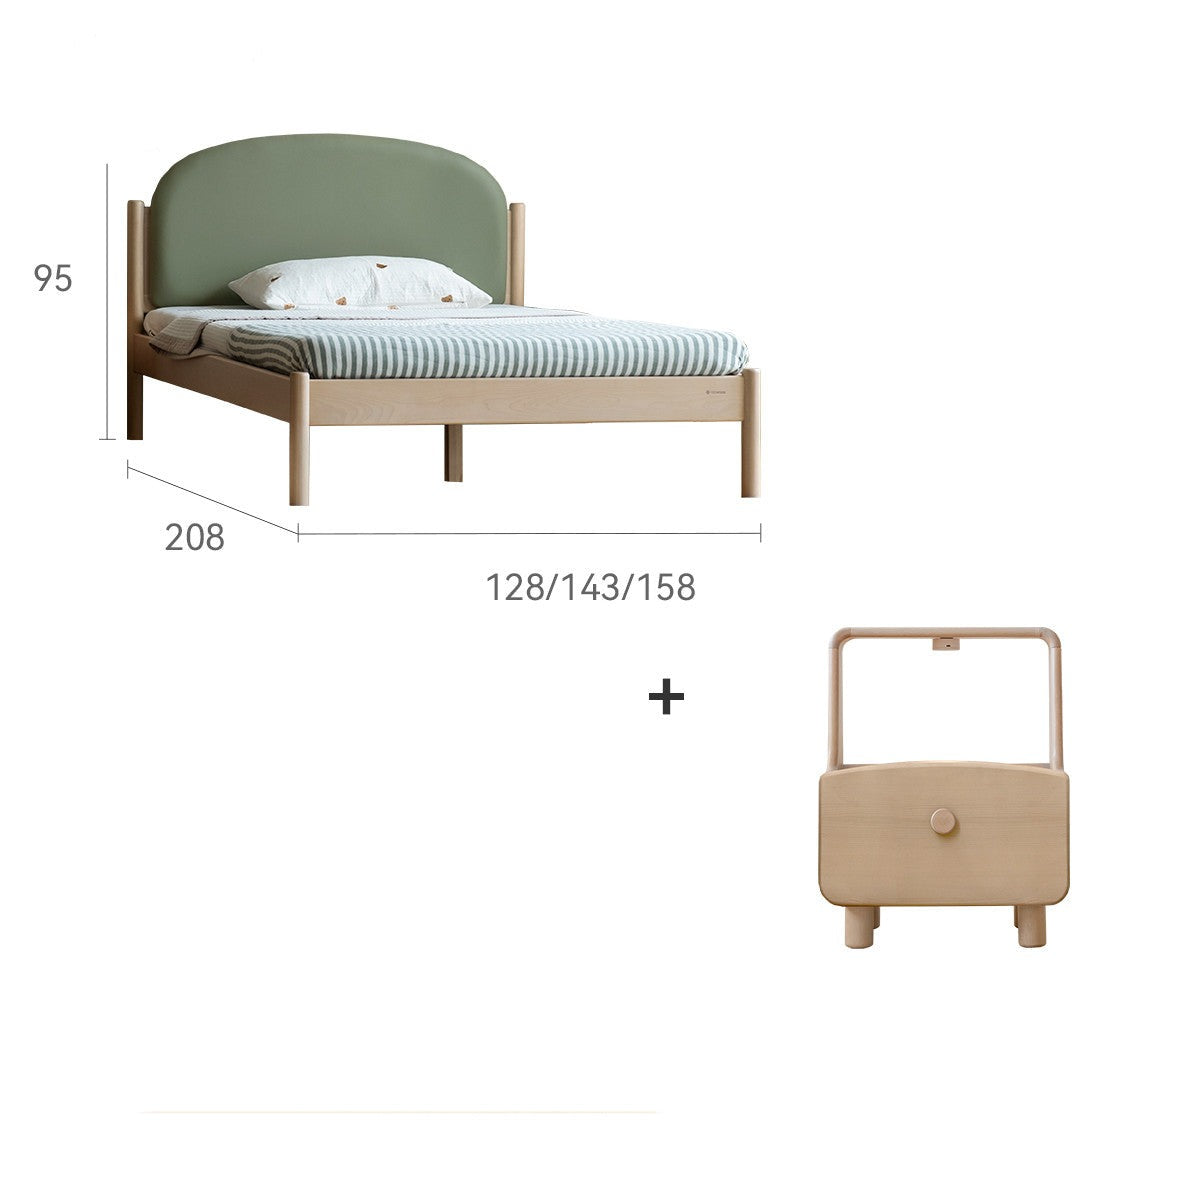 Birch solid Wood Children's Bed Organic Leather")